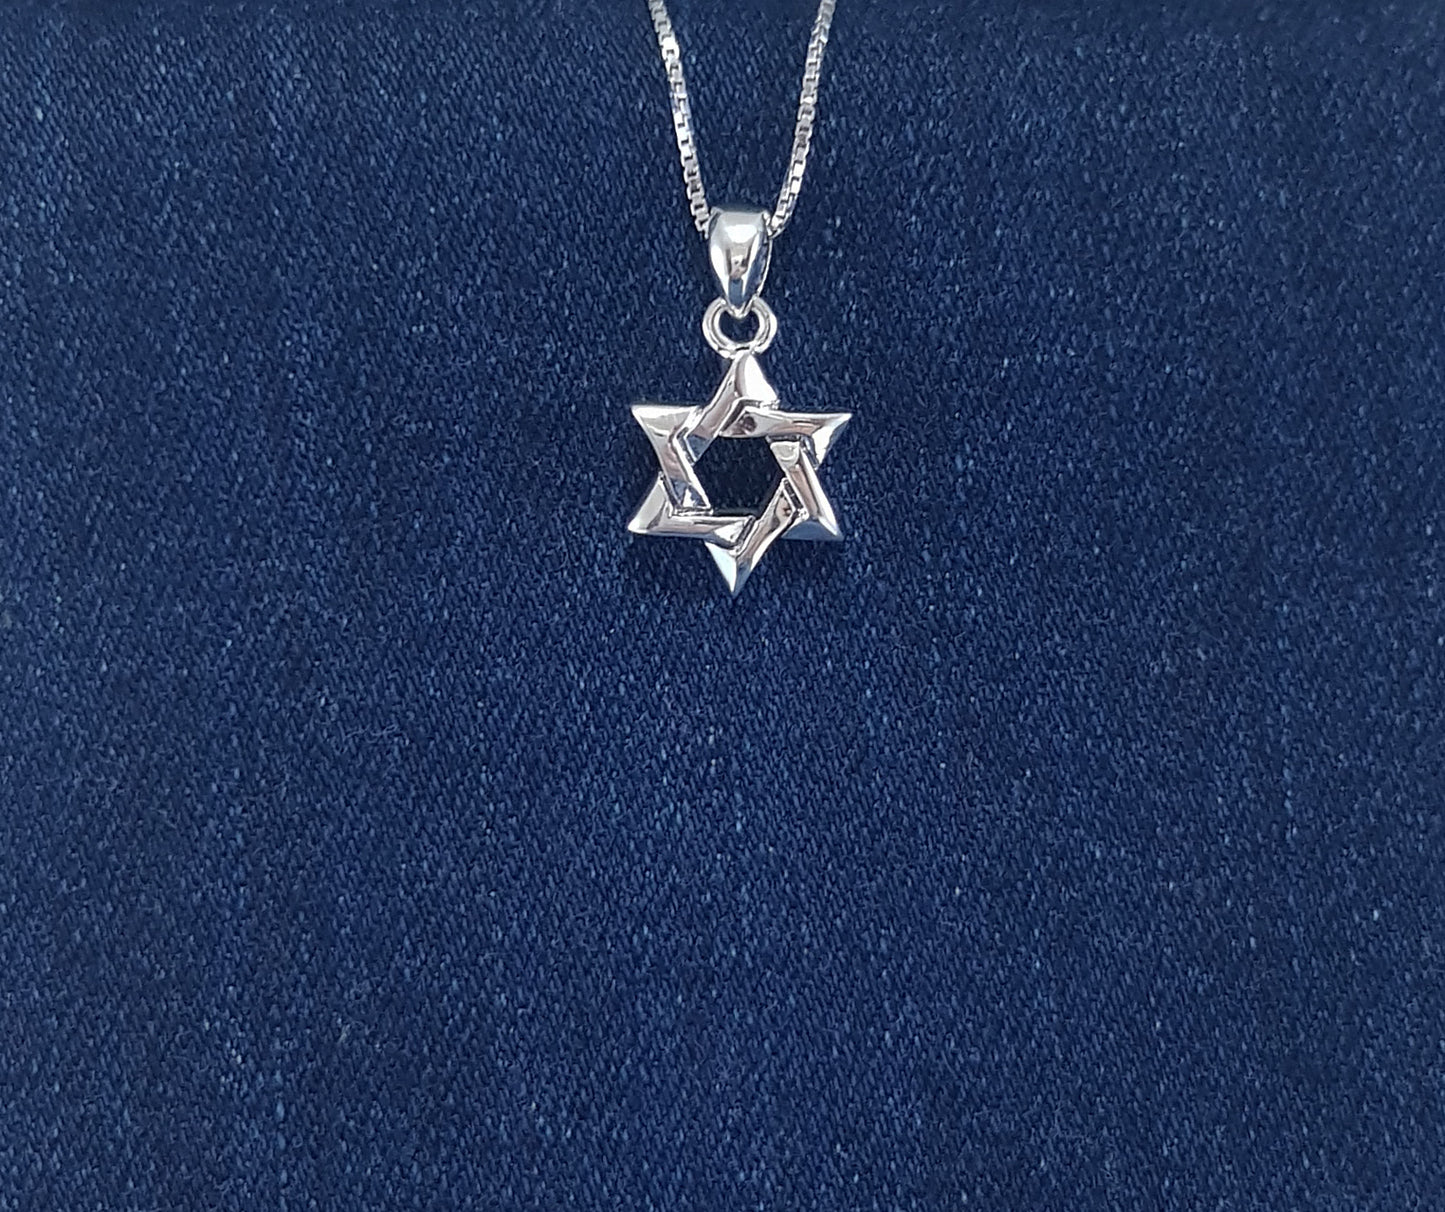 A dainty and elegant Small Star of David pendant, representing the Jewish faith and identity. 